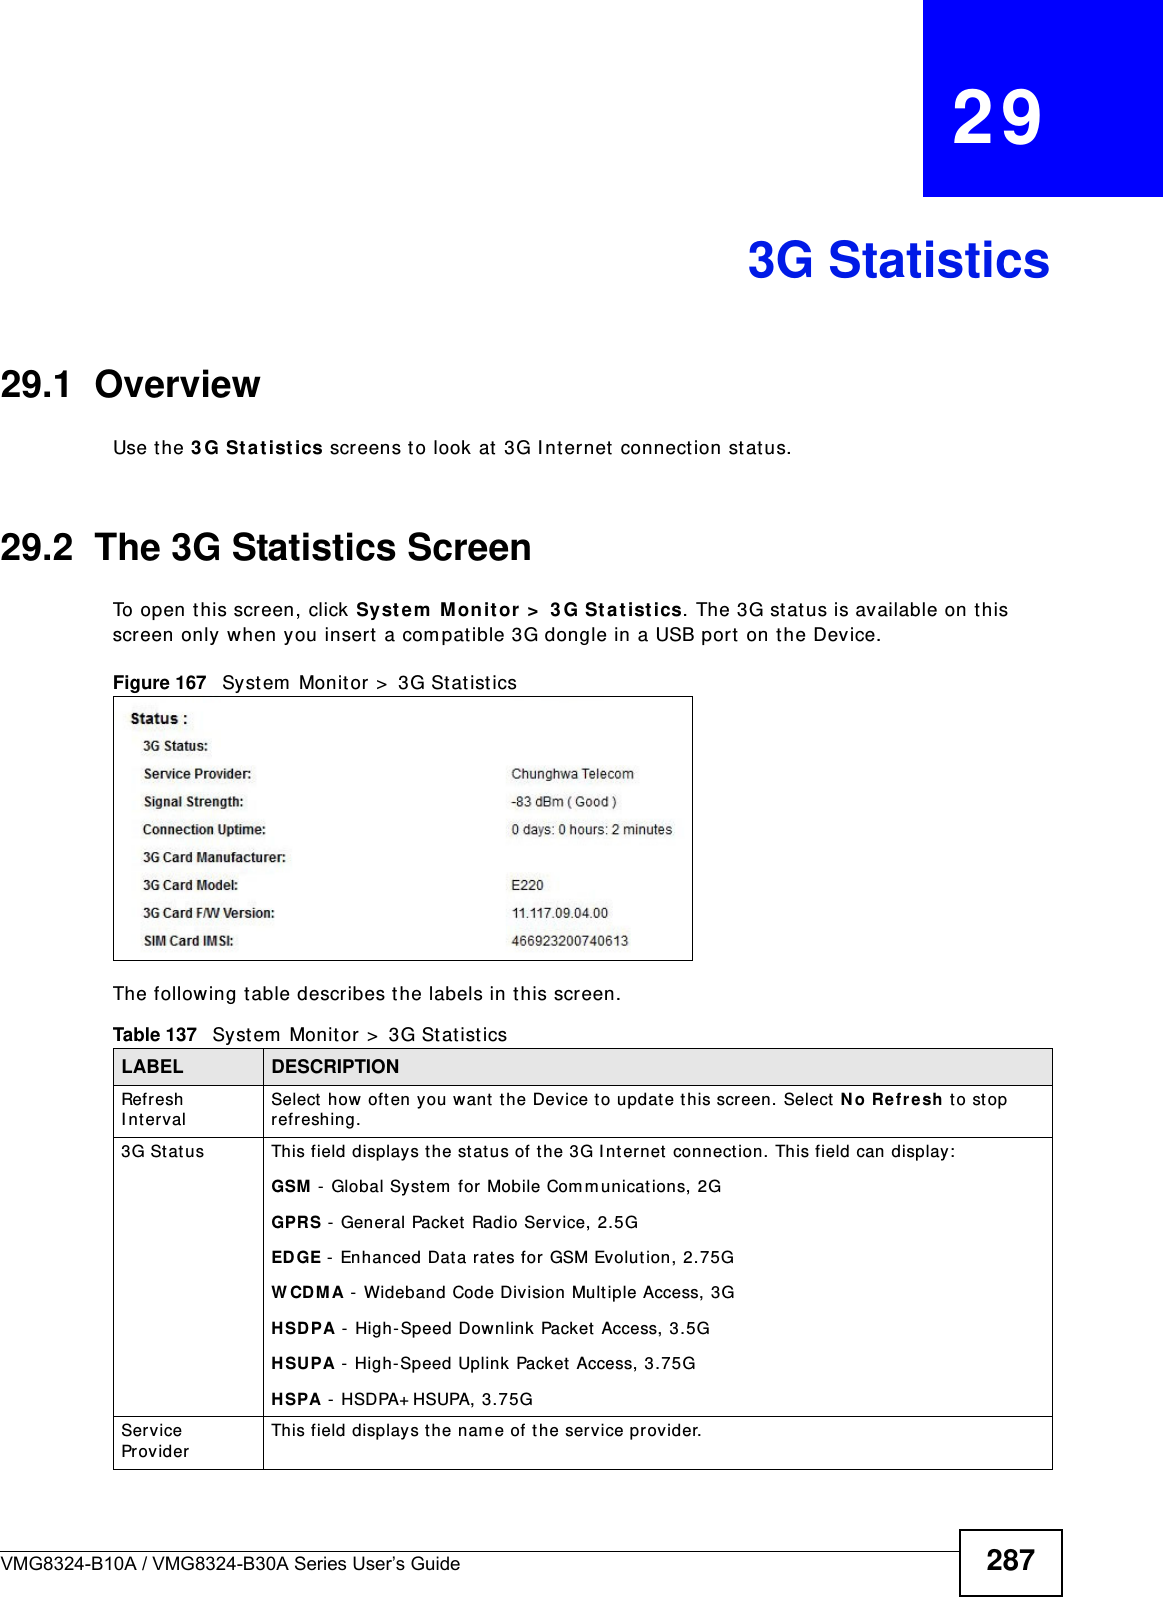 VMG8324-B10A / VMG8324-B30A Series User’s Guide 287CHAPTER   293G Statistics29.1  OverviewUse t he 3 G St at istics screens t o look at  3G I nt er net  connect ion stat us.29.2  The 3G Statistics ScreenTo open this screen, click Sy st em  M on it or  &gt;  3 G St at istics. The 3G st at us is available on this screen only when you insert a com pat ible 3G dongle in a USB port  on the Device.Figure 167   Syst em  Monit or &gt;  3G St atistics The following t able describes the labels in t his screen.  Table 137   System  Monitor &gt;  3G Stat ist icsLABEL DESCRIPTIONRefresh I nt ervalSelect  how  oft en you want t he Device to updat e this screen. Select No Refr esh to stop refreshing.3G St at us This field displays the st at us of the 3G Internet  connect ion. This field can display:GSM  - Global System  for Mobile Com m unicat ions, 2GGPRS -  General Packet  Radio Service, 2.5GED GE - Enhanced Data rates for GSM Evolut ion, 2.75GW CDM A - Wideband Code Div ision Mult iple Access, 3GHSDPA -  High- Speed Dow nlink Packet  Access, 3.5GHSUPA -  High- Speed Uplink Packet Access, 3.75GHSPA - HSDPA+ HSUPA, 3.75GService ProviderThis field displays the nam e of the service prov ider.